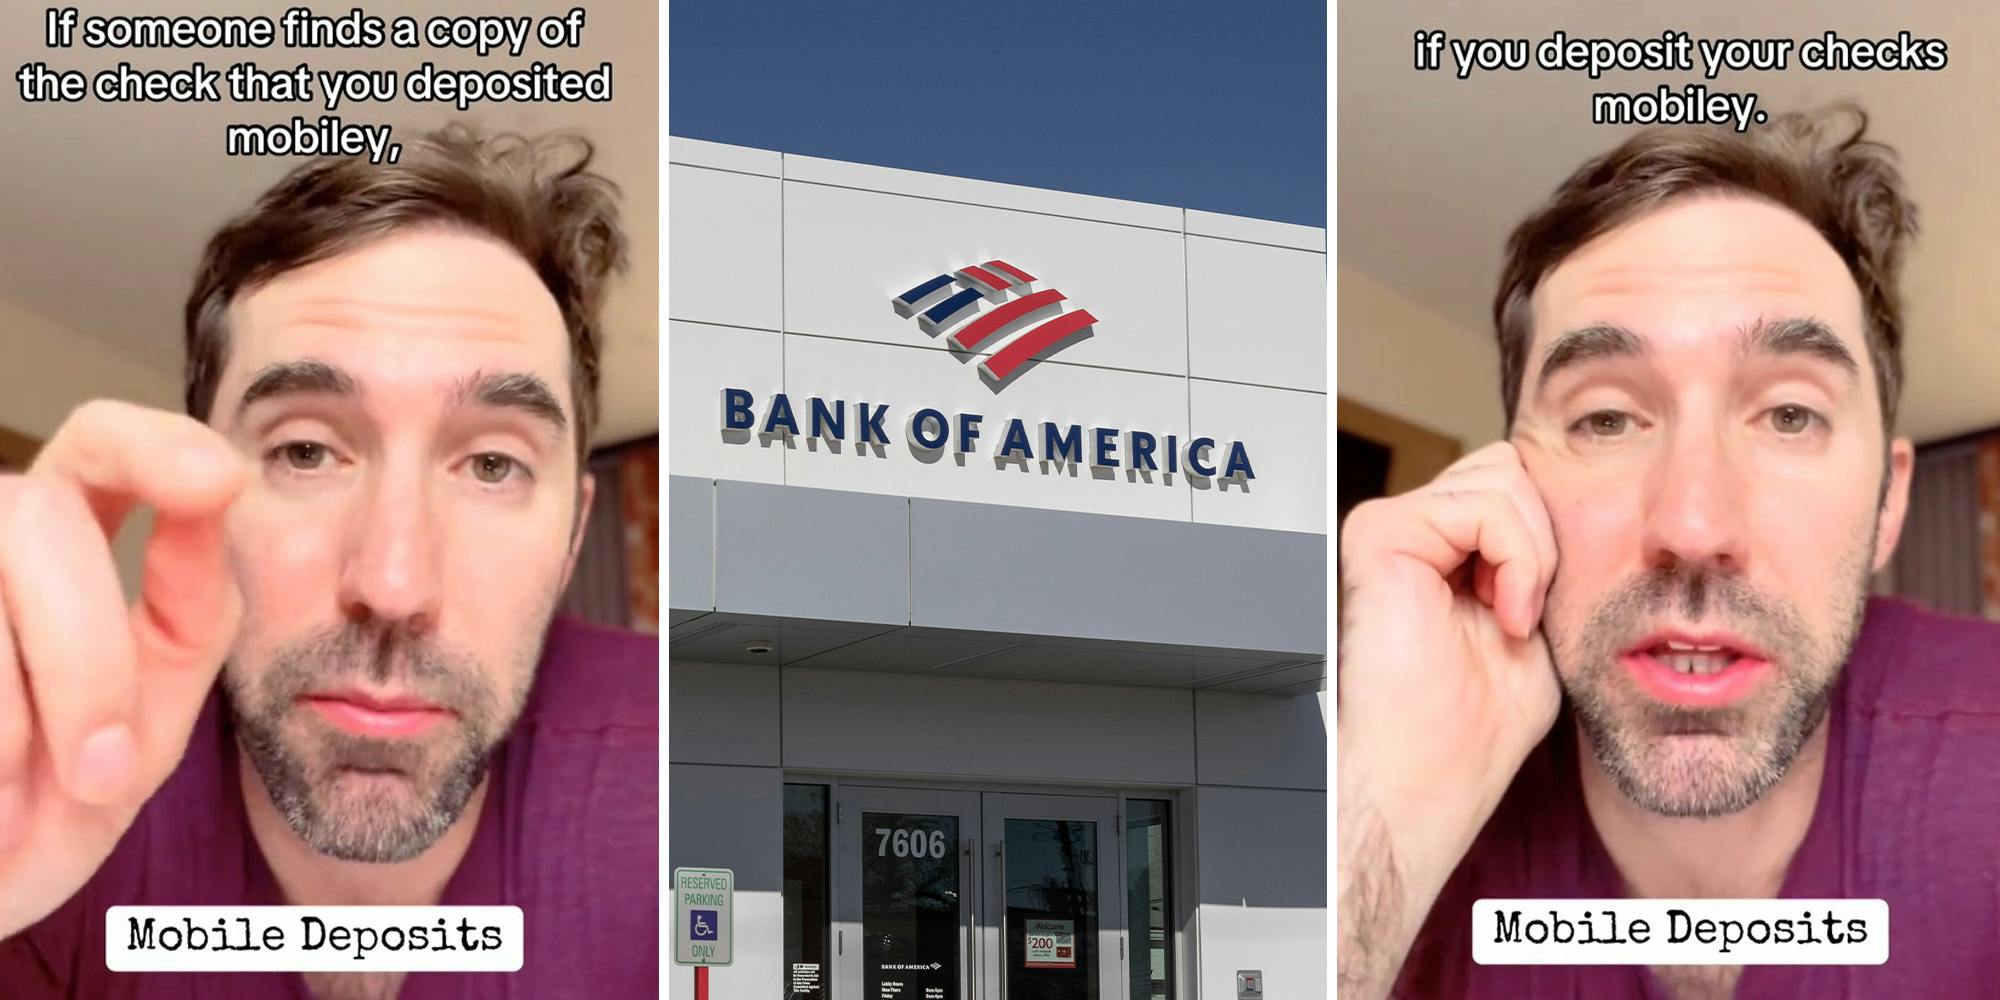 ‘It happened right away’: Bank of America customer issues warning about depositing checks on mobile